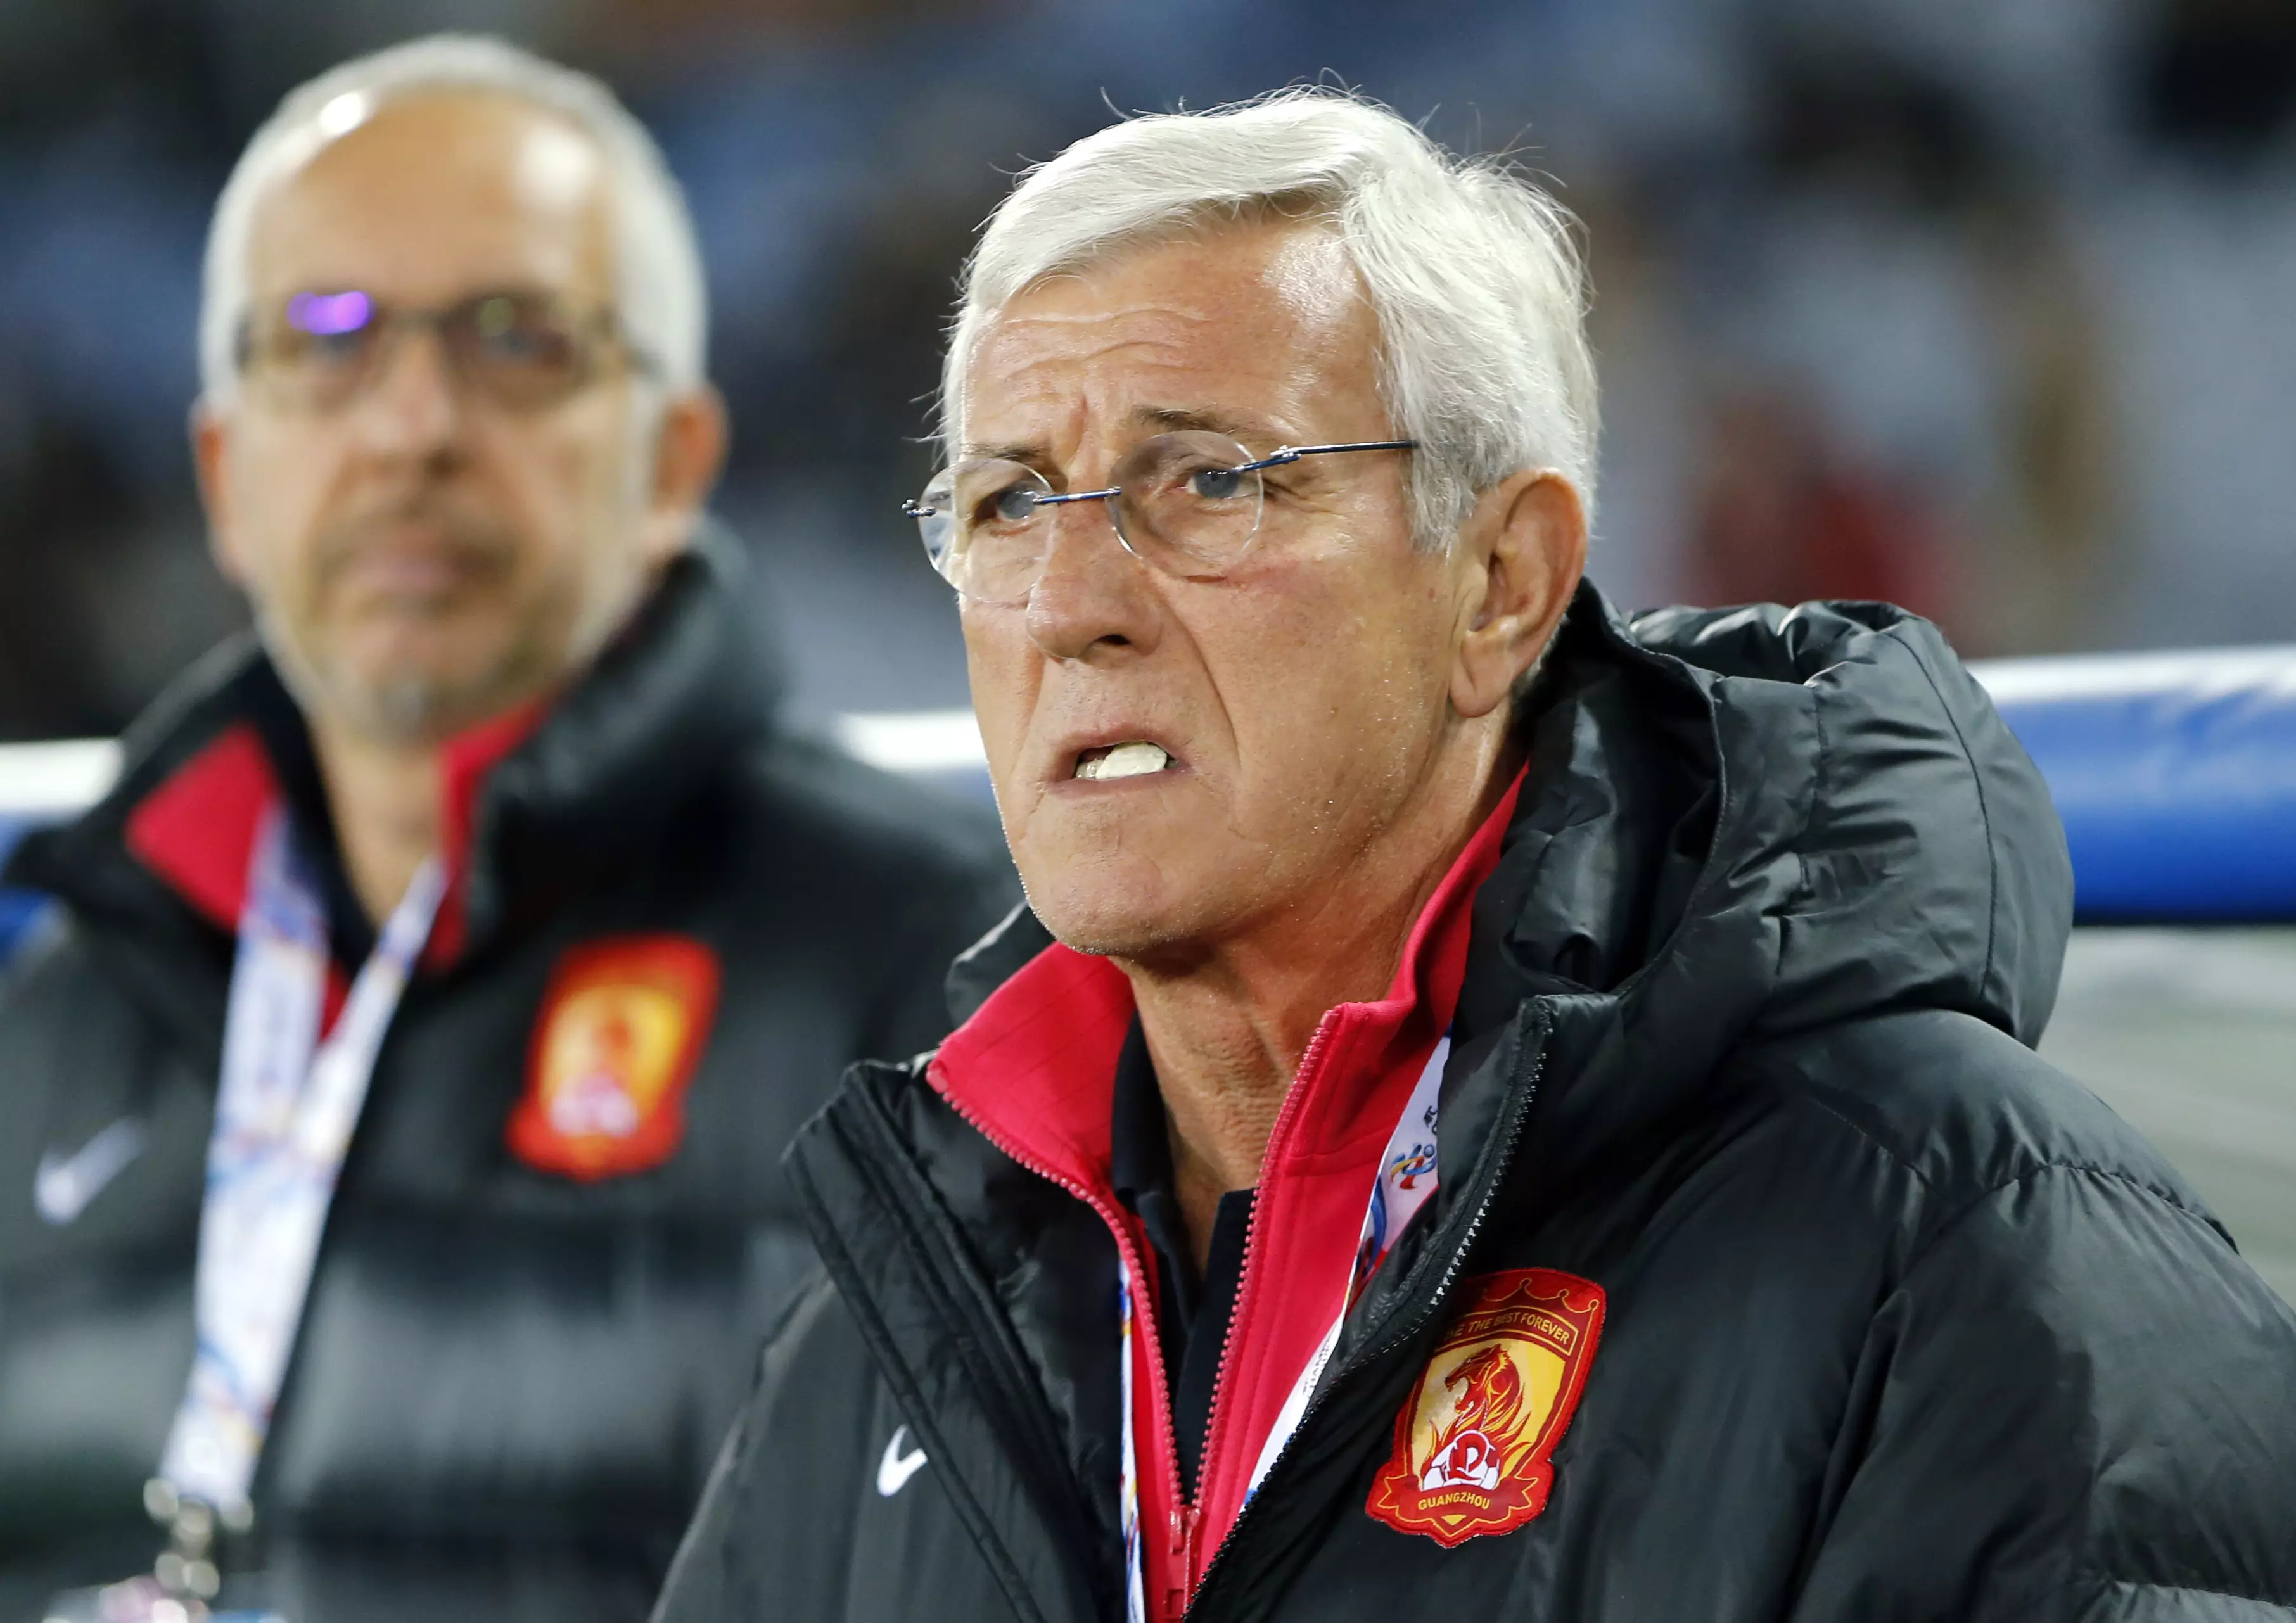 Marcello Lippi Set To Earn ALL THE MONEY IN THE WORLD As New China Boss